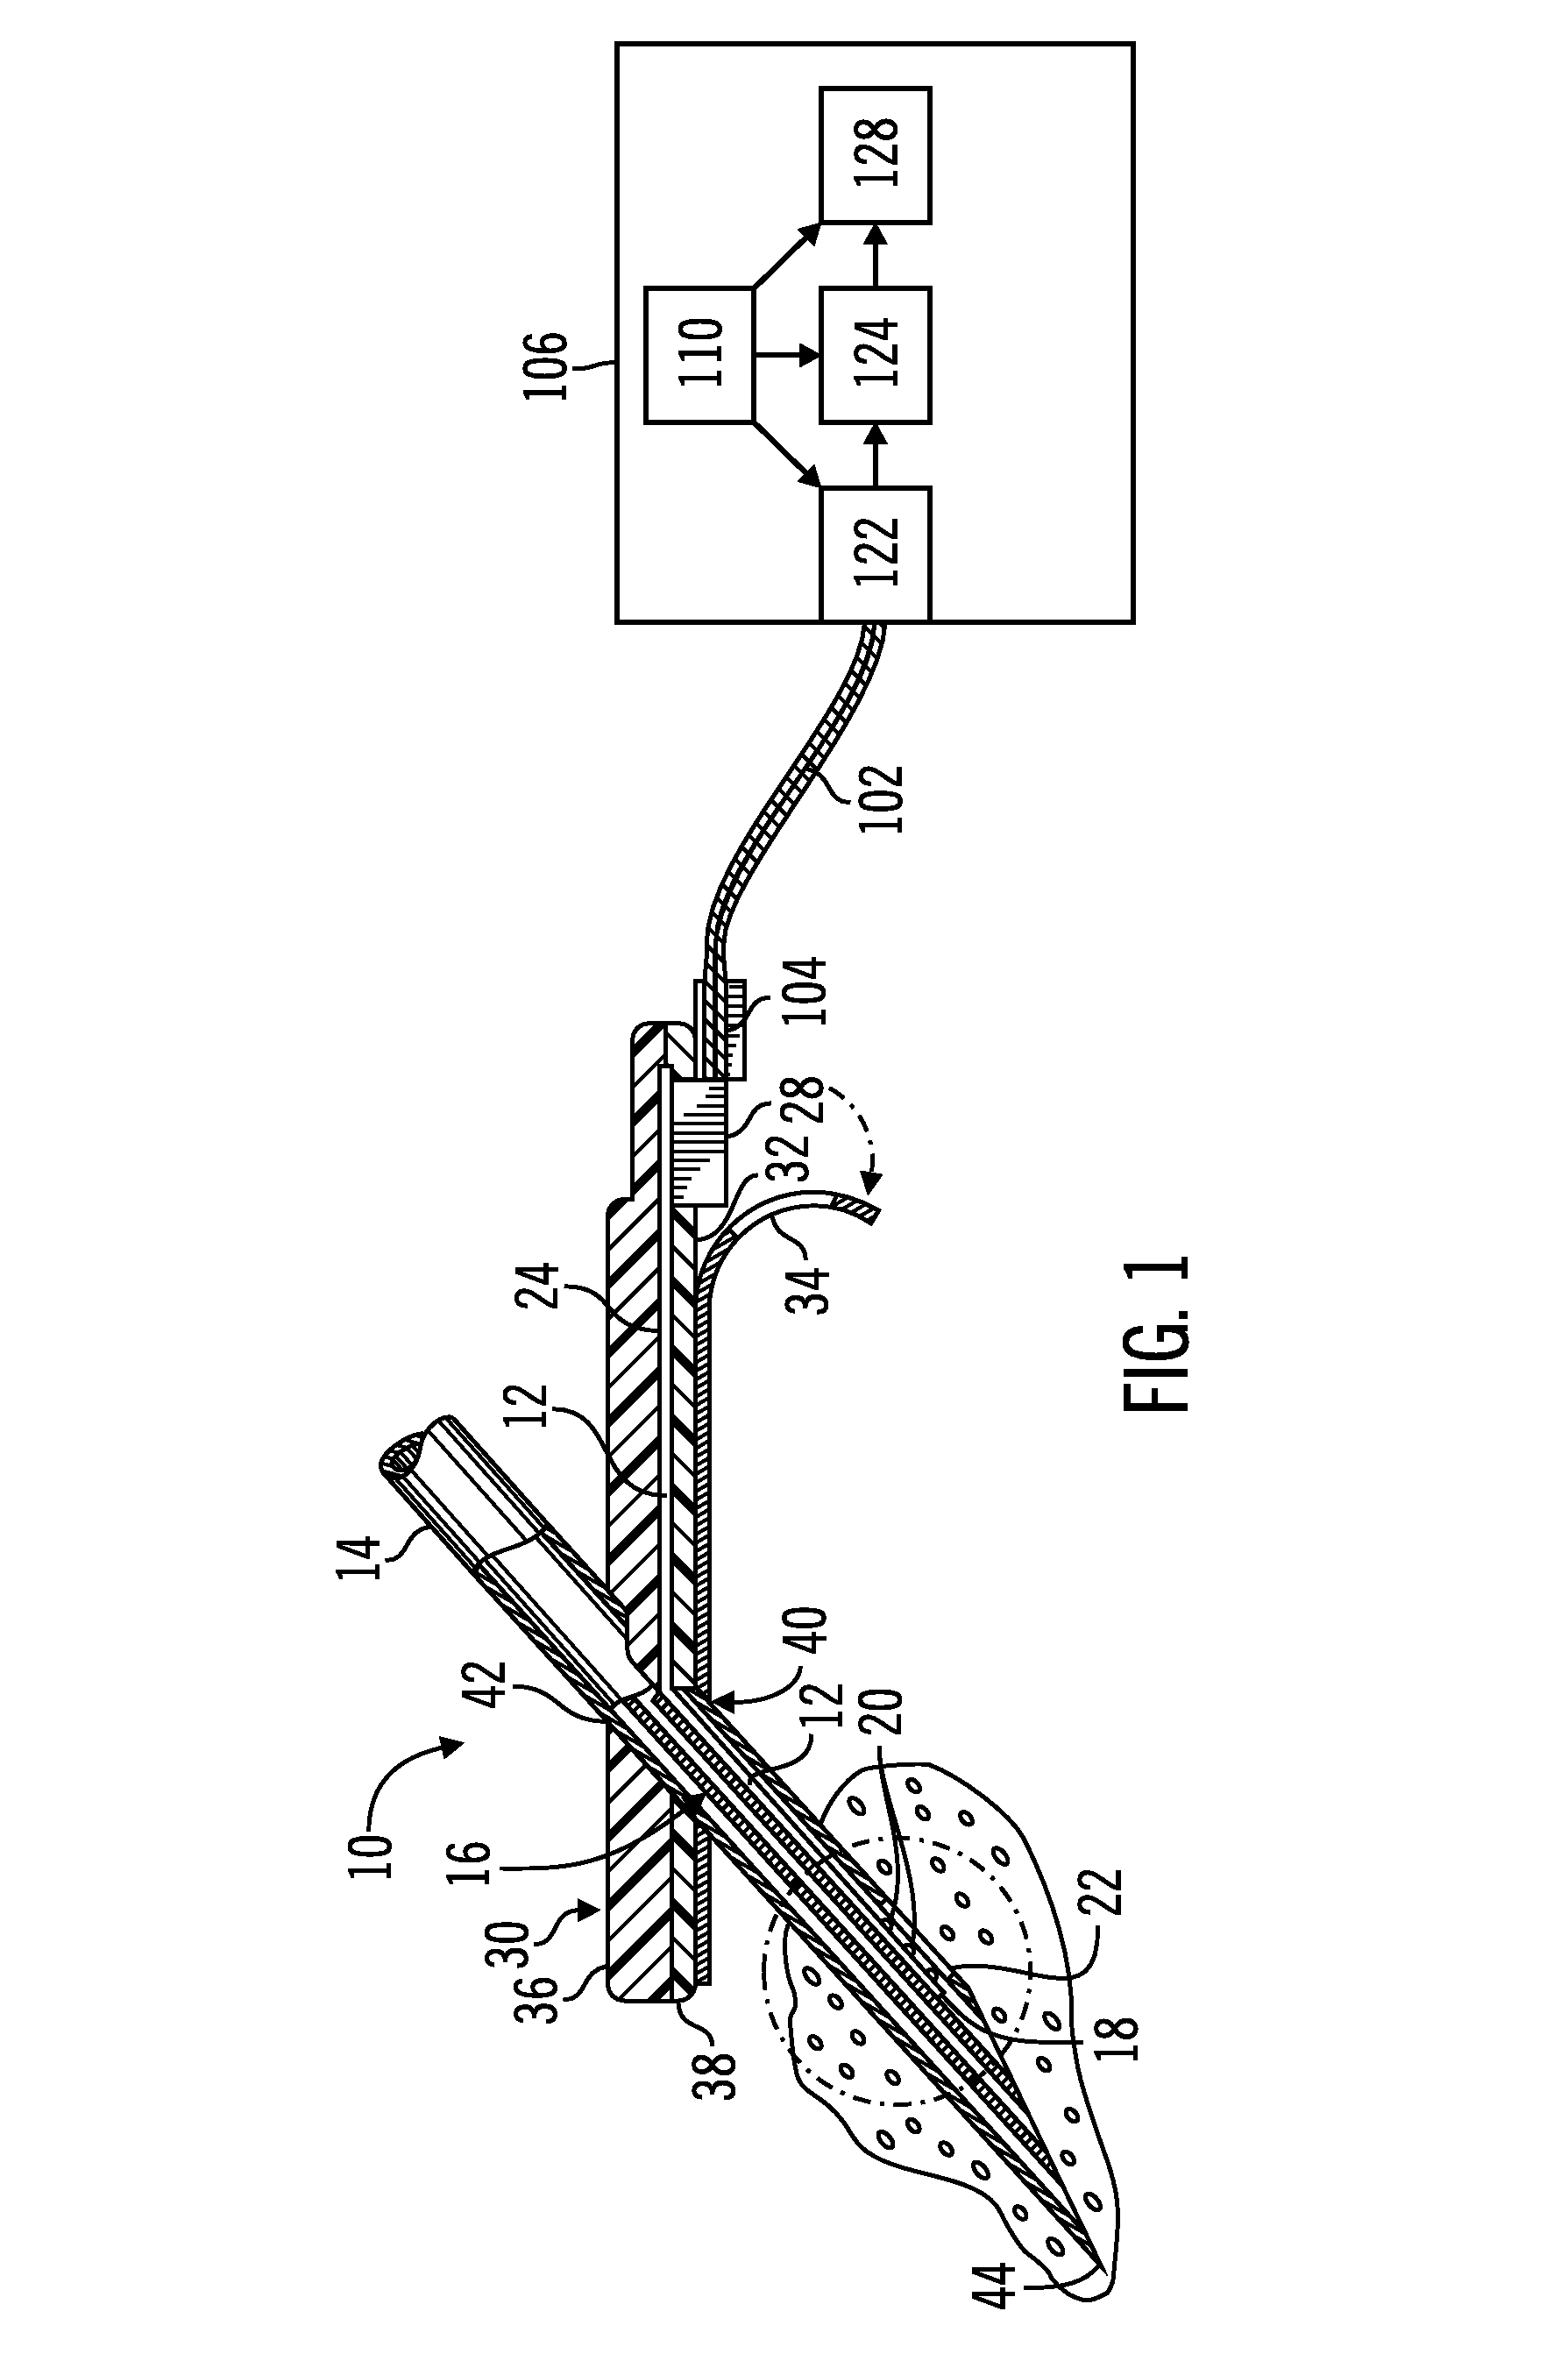 System and method for determining the point of hydration and proper time to apply potential to a glucose sensor